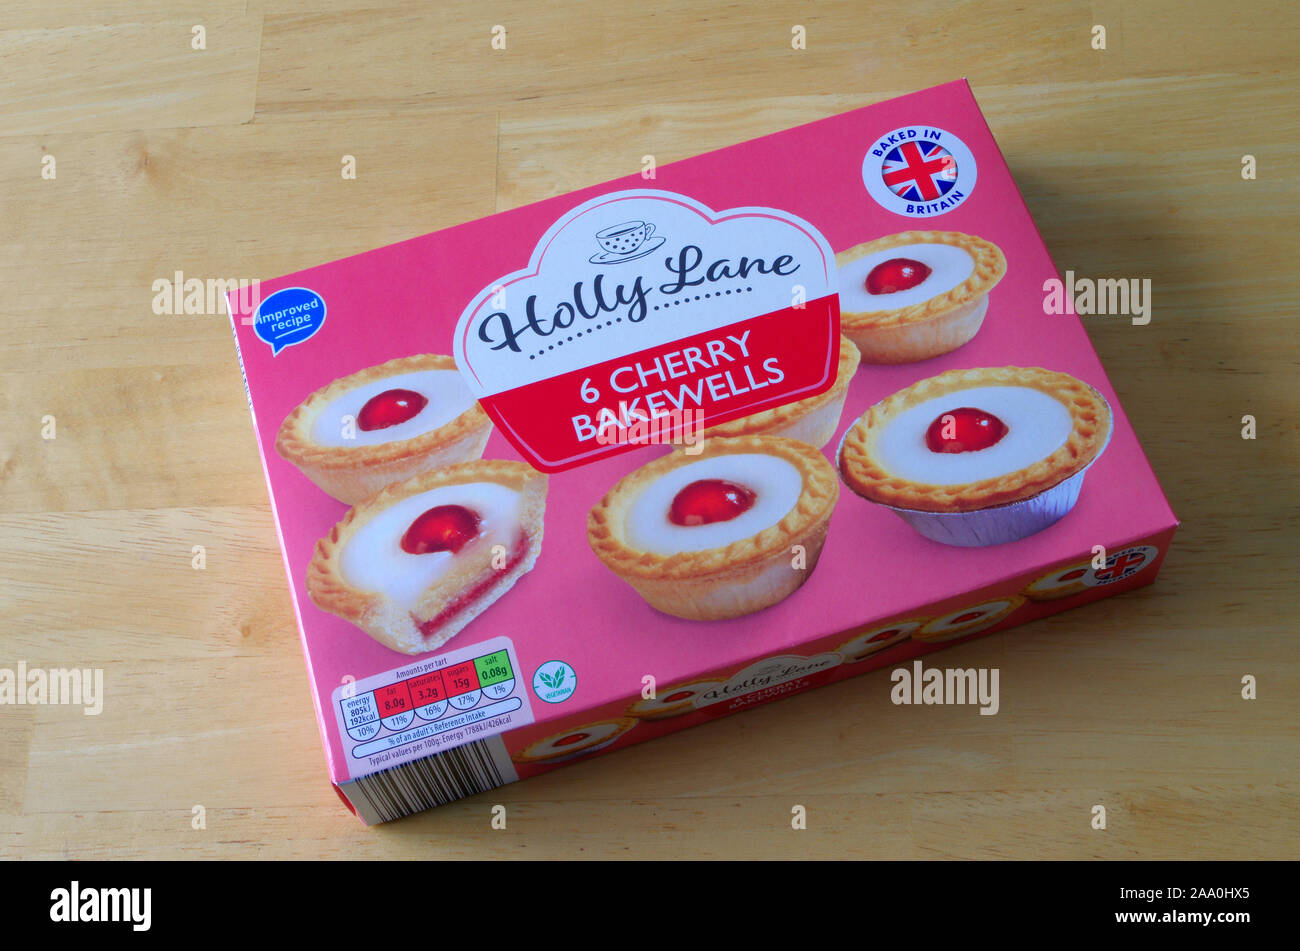 Packet of Holly Lane 6 Cherry Bakewell Cakes Stock Photo